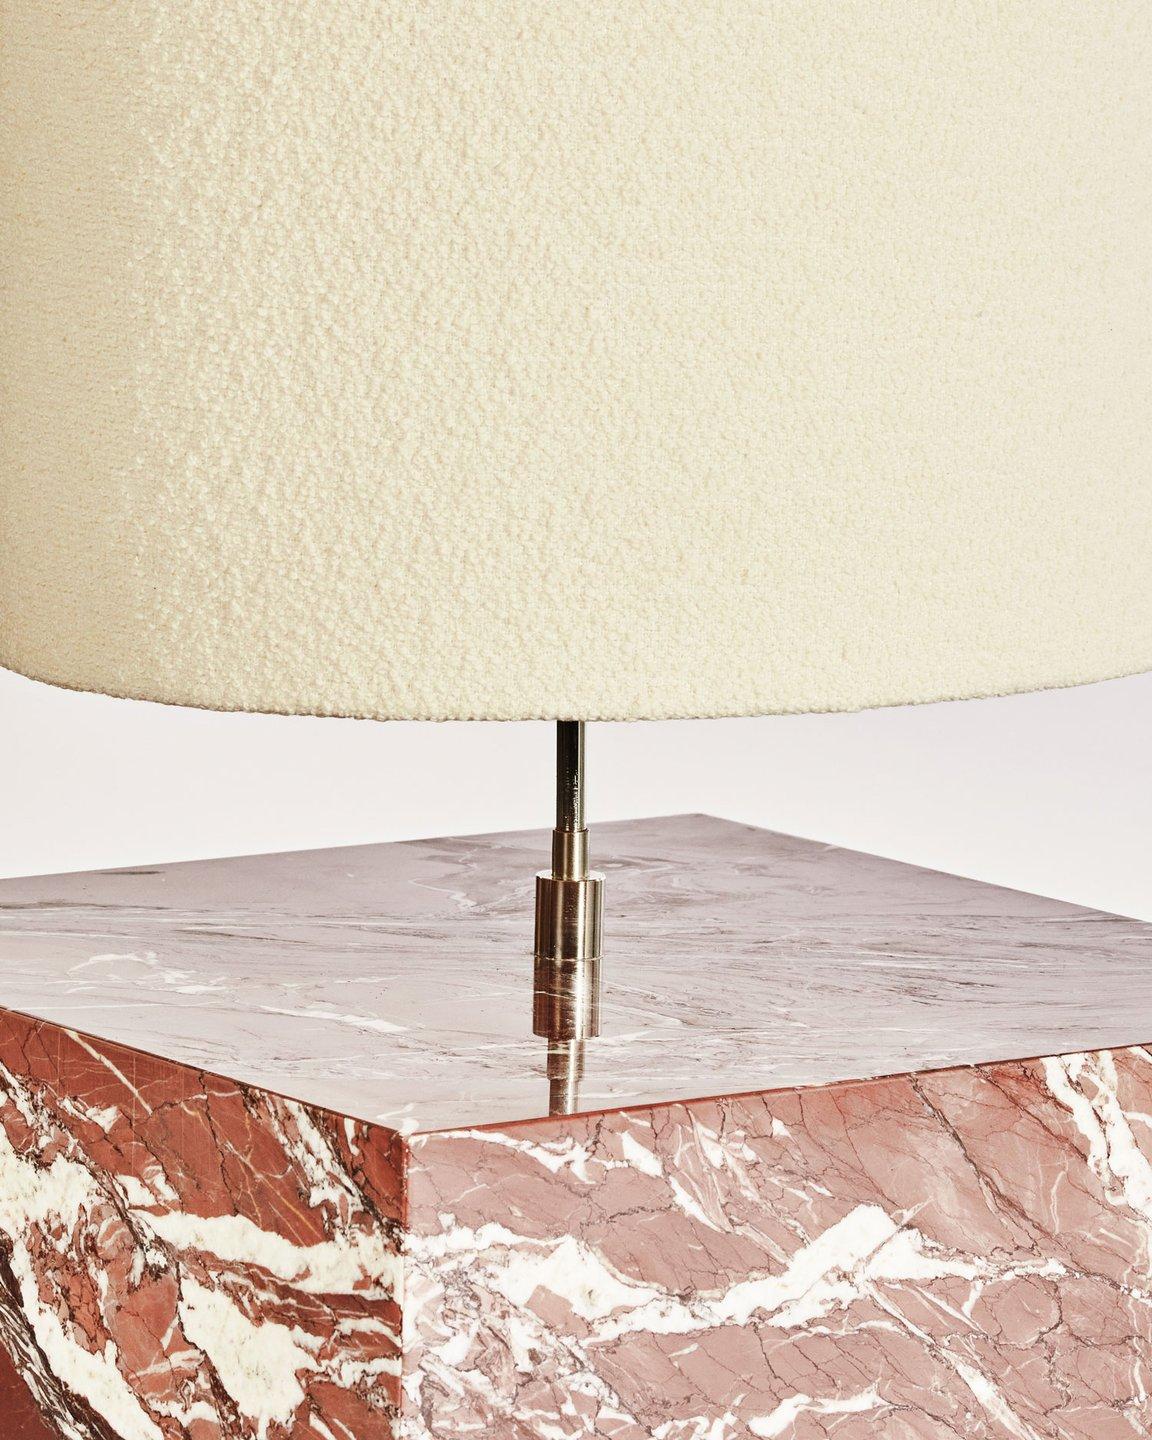 The Coexist floor lamp consists of a marble cube base and a lampshade made from boucle fabric.

The special lamp serves as a sculptural centerpiece for any room, emitting a soft warm light to draw the viewer into the materials. The bold geometry